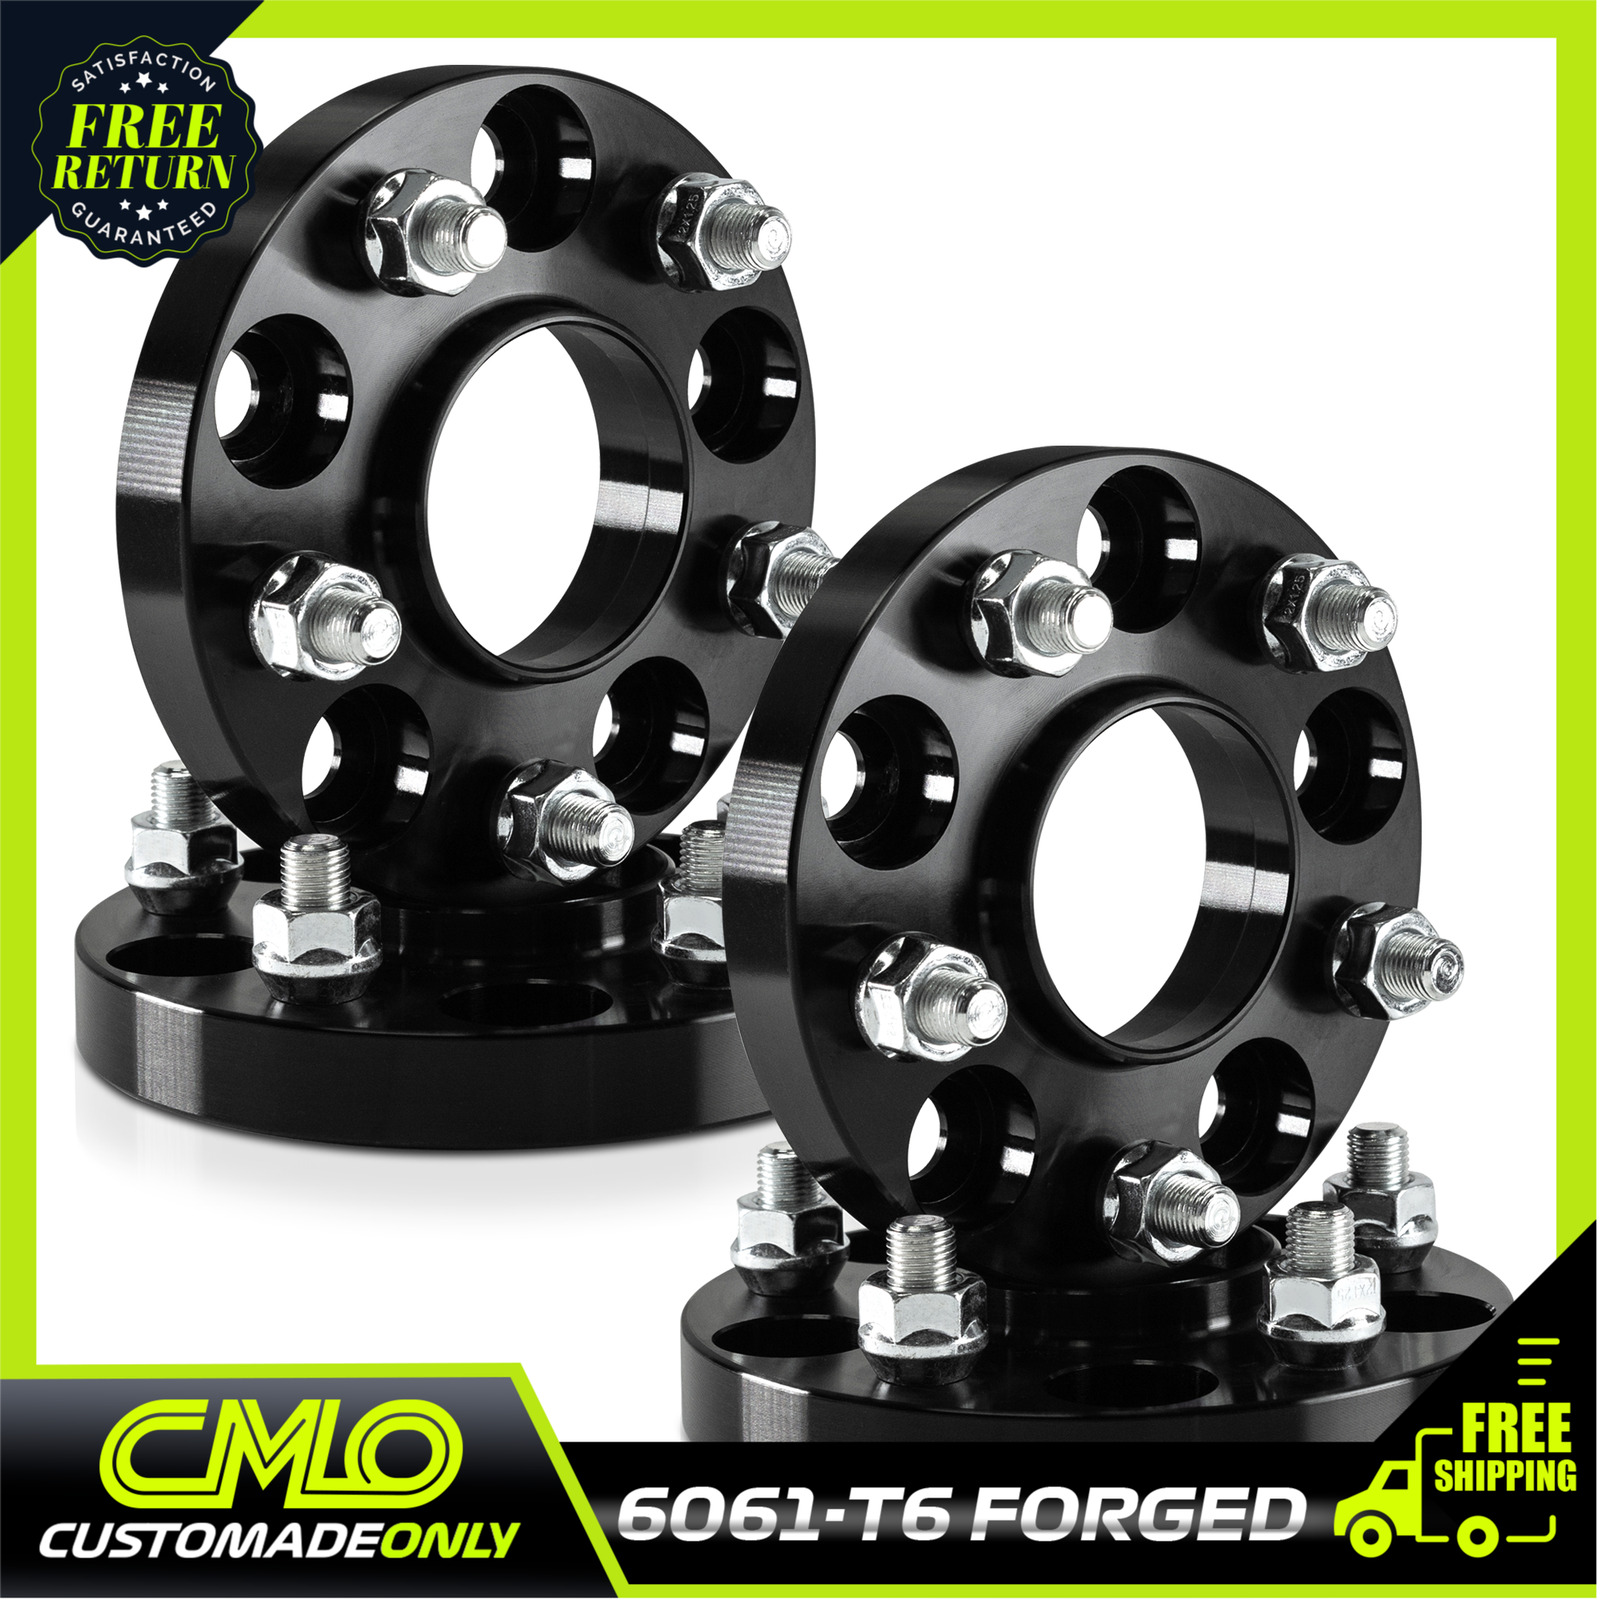 4pc 20mm Black Hubcentric Wheel Spacers 5x100 Fits tC Celica Camry Corolla Prius